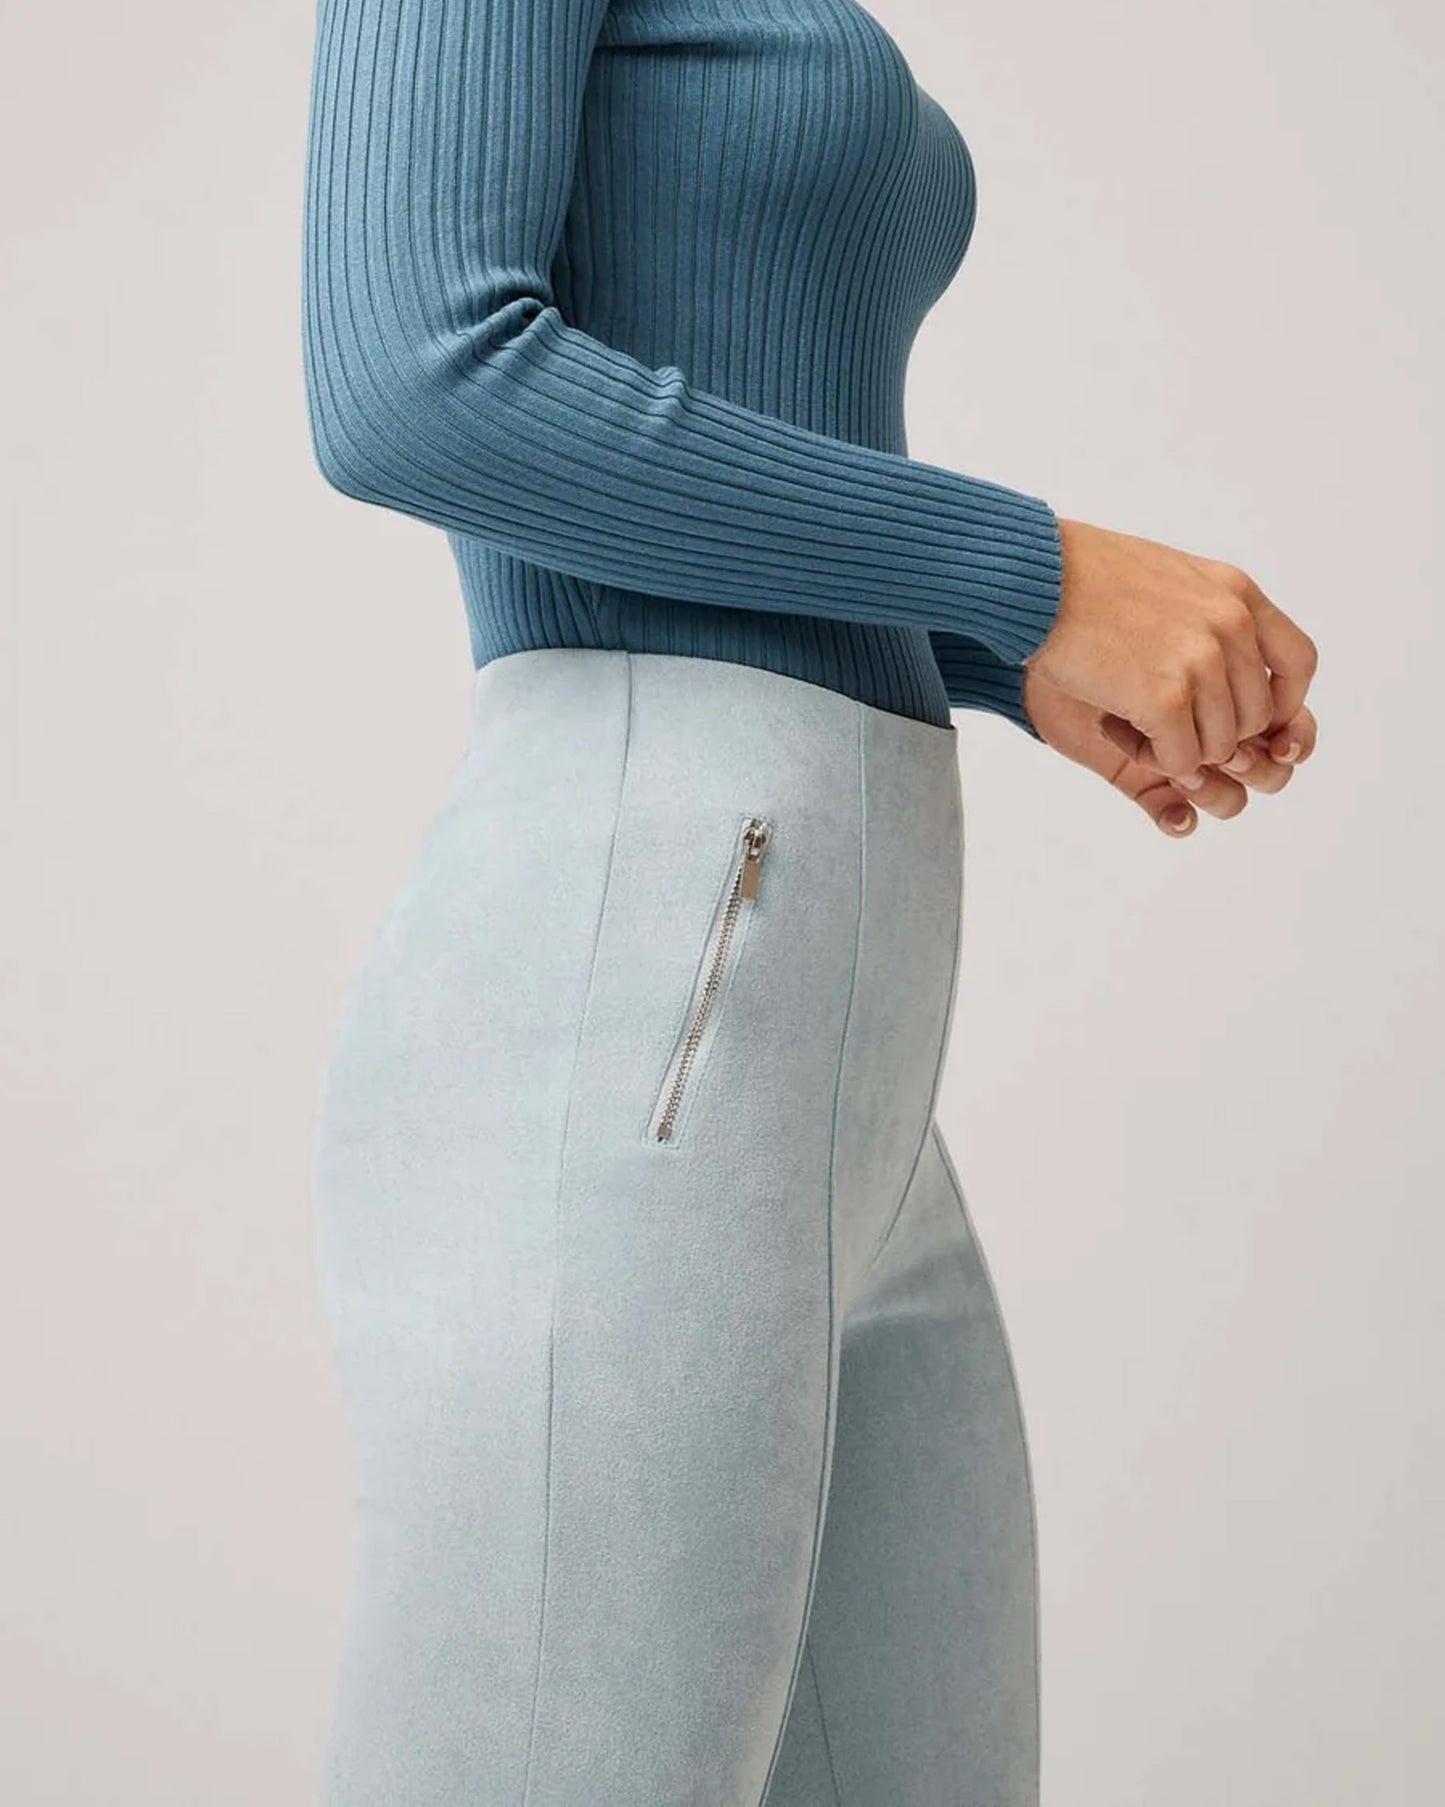 Ysabel Mora 70297 Faux Suede Leggings - Pale pastel blue velvet suede effect high waisted trouser leggings (treggings) with raised seam down the front and zipper details on the sides.